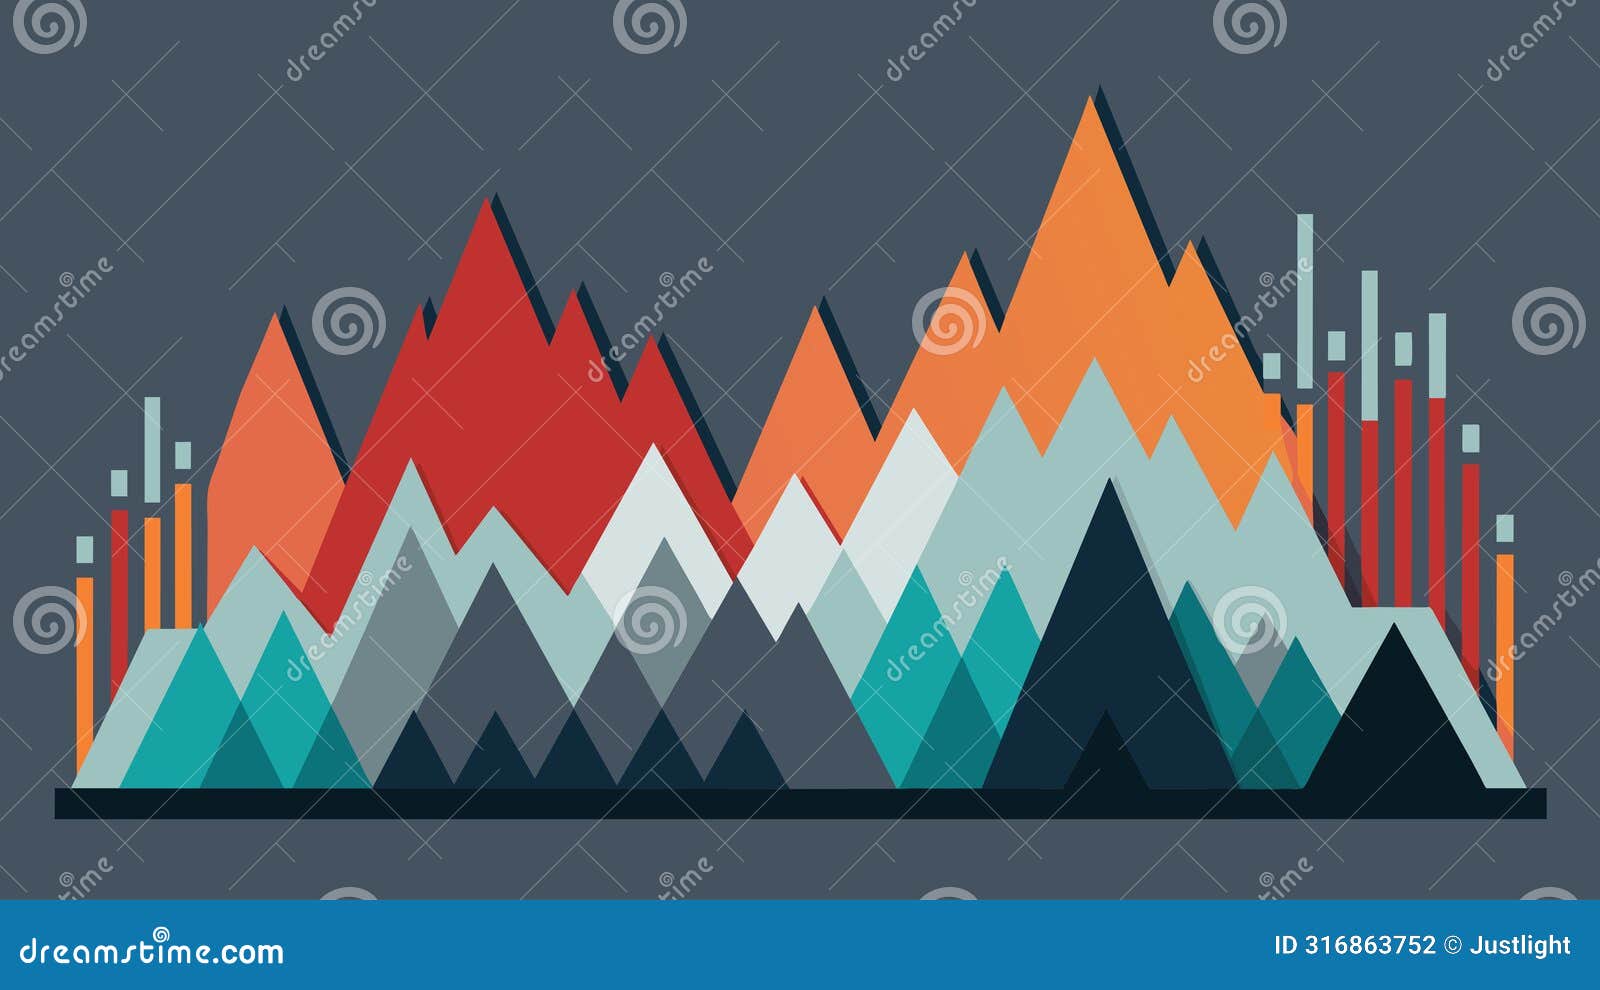 a graphic depicting a jagged graph with peaks and valleys representing fluctuations in language proficiency for